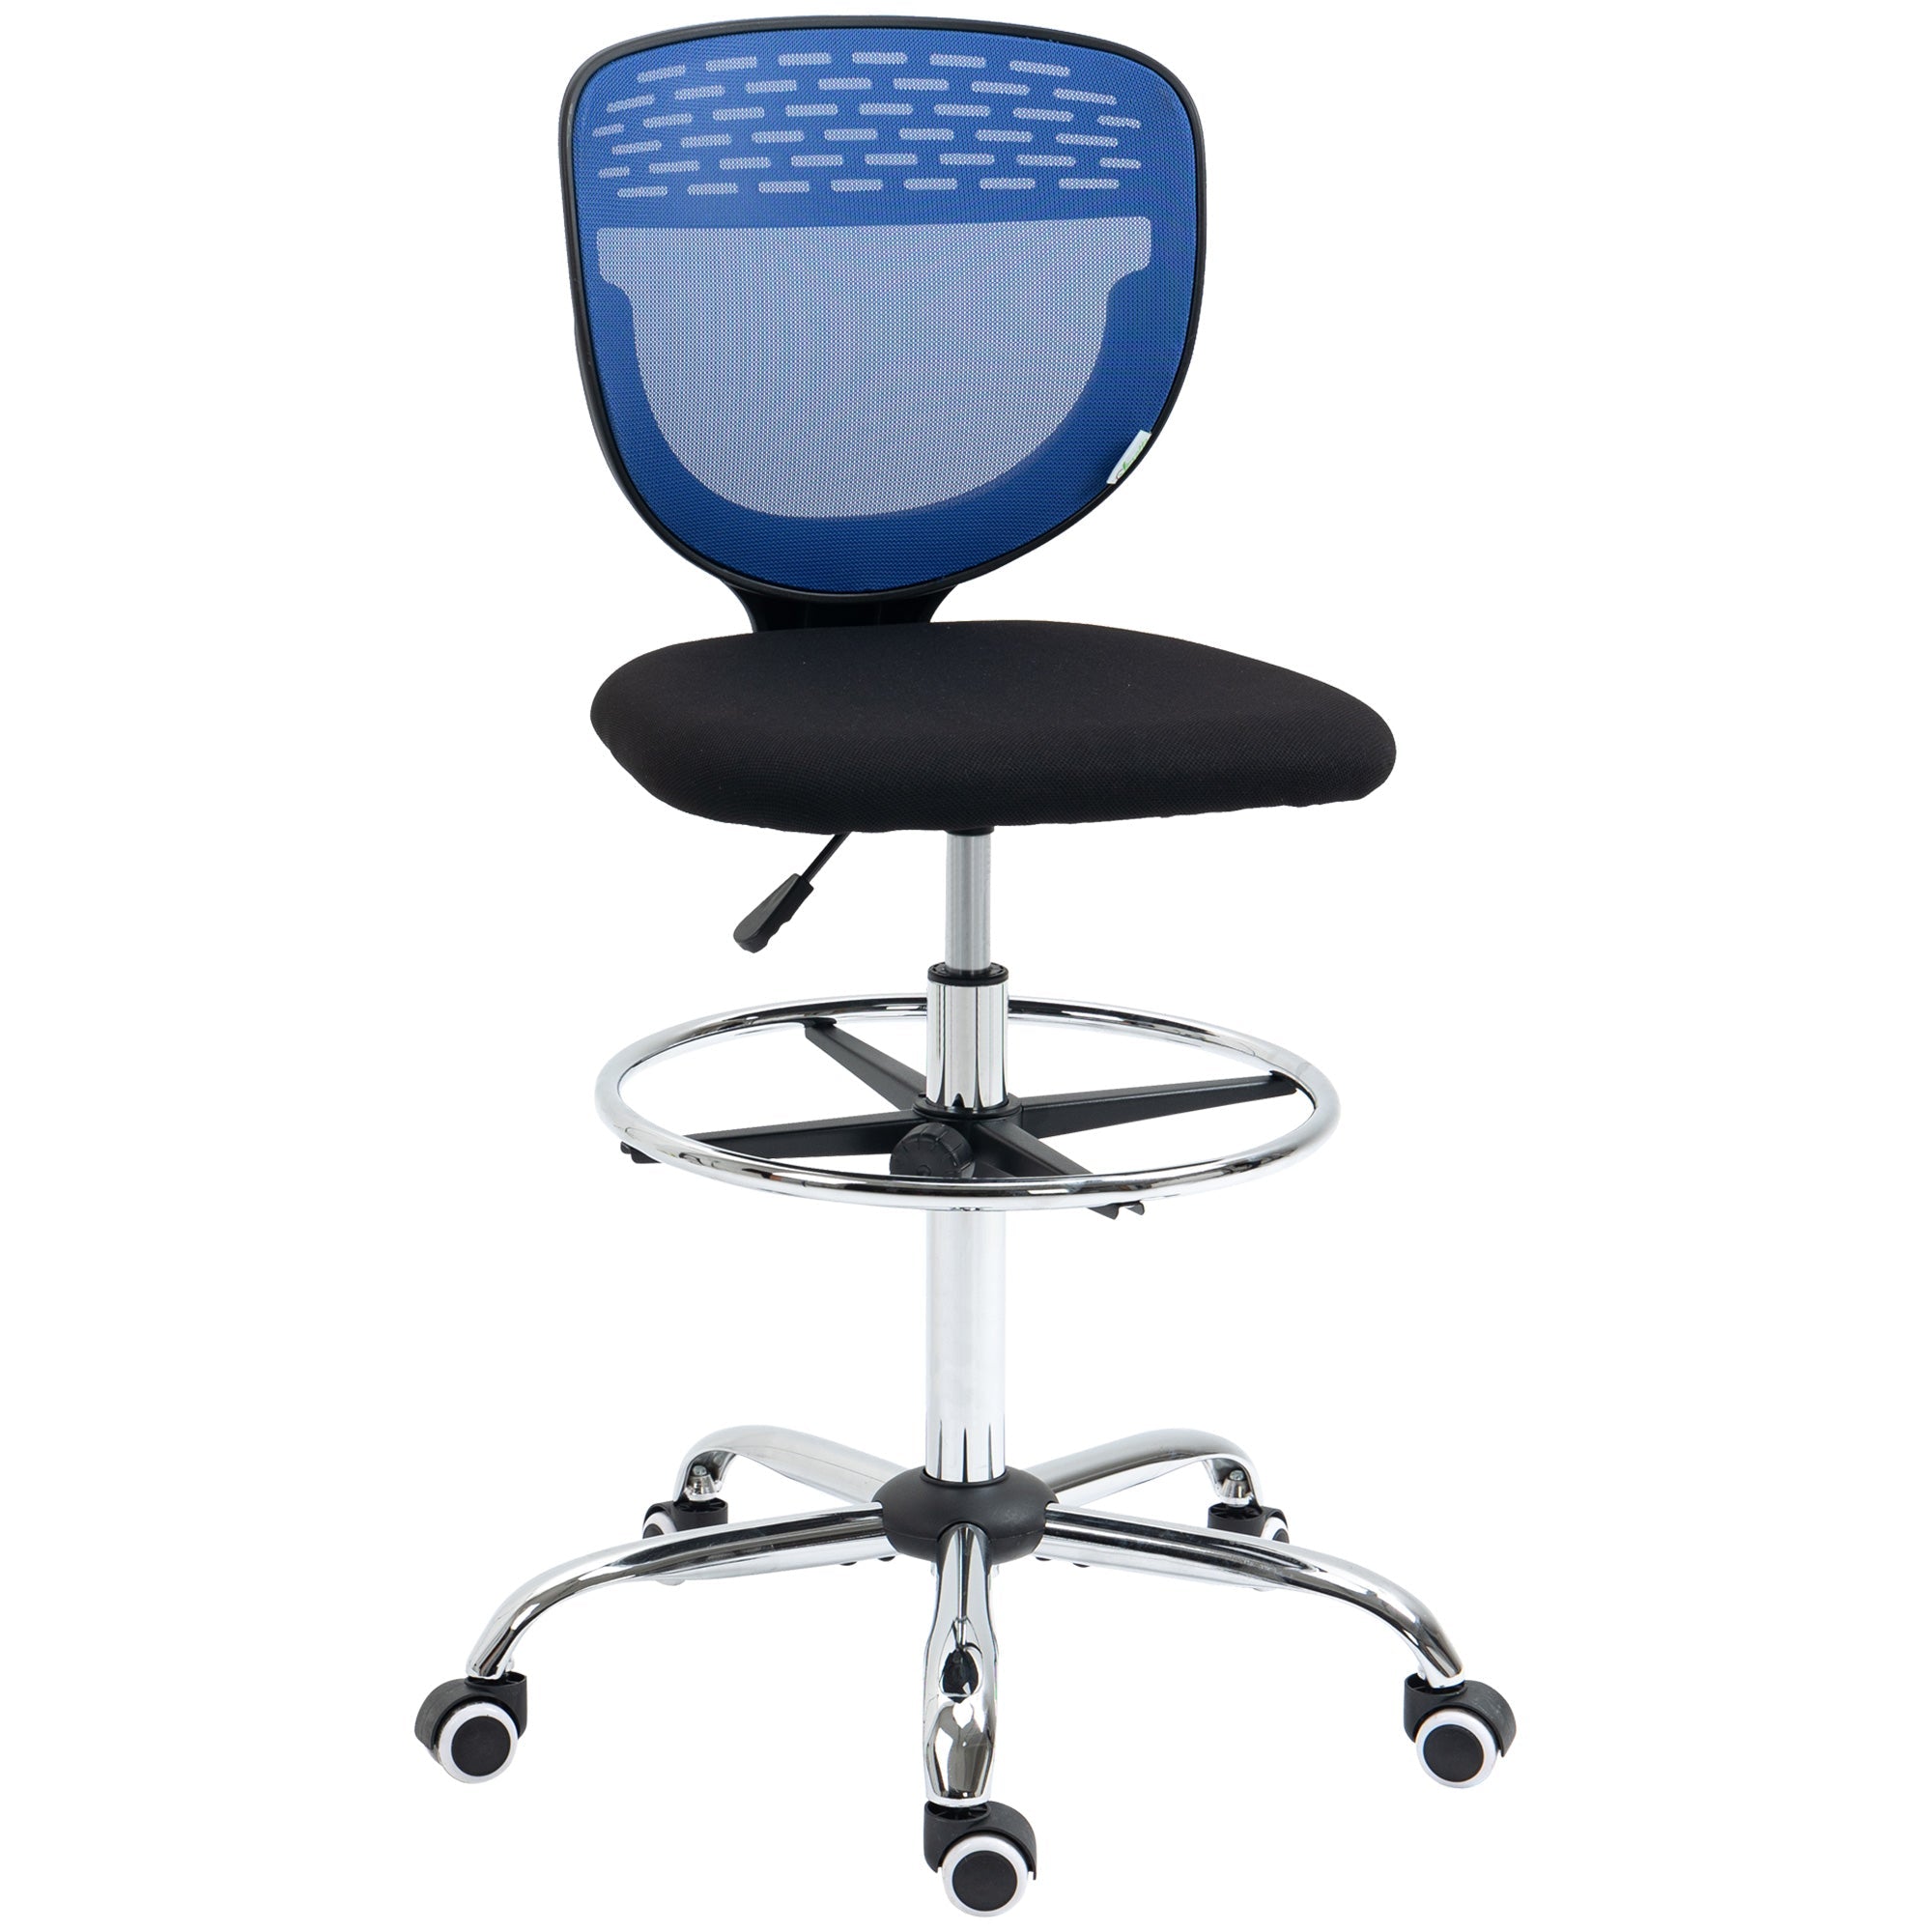 Drafting Chair, Swivel Office Draughtsman Chair, Mesh Standing Desk Chair with Lumbar Support, Adjustable Foot Ring, Armless, Dark Blue-0